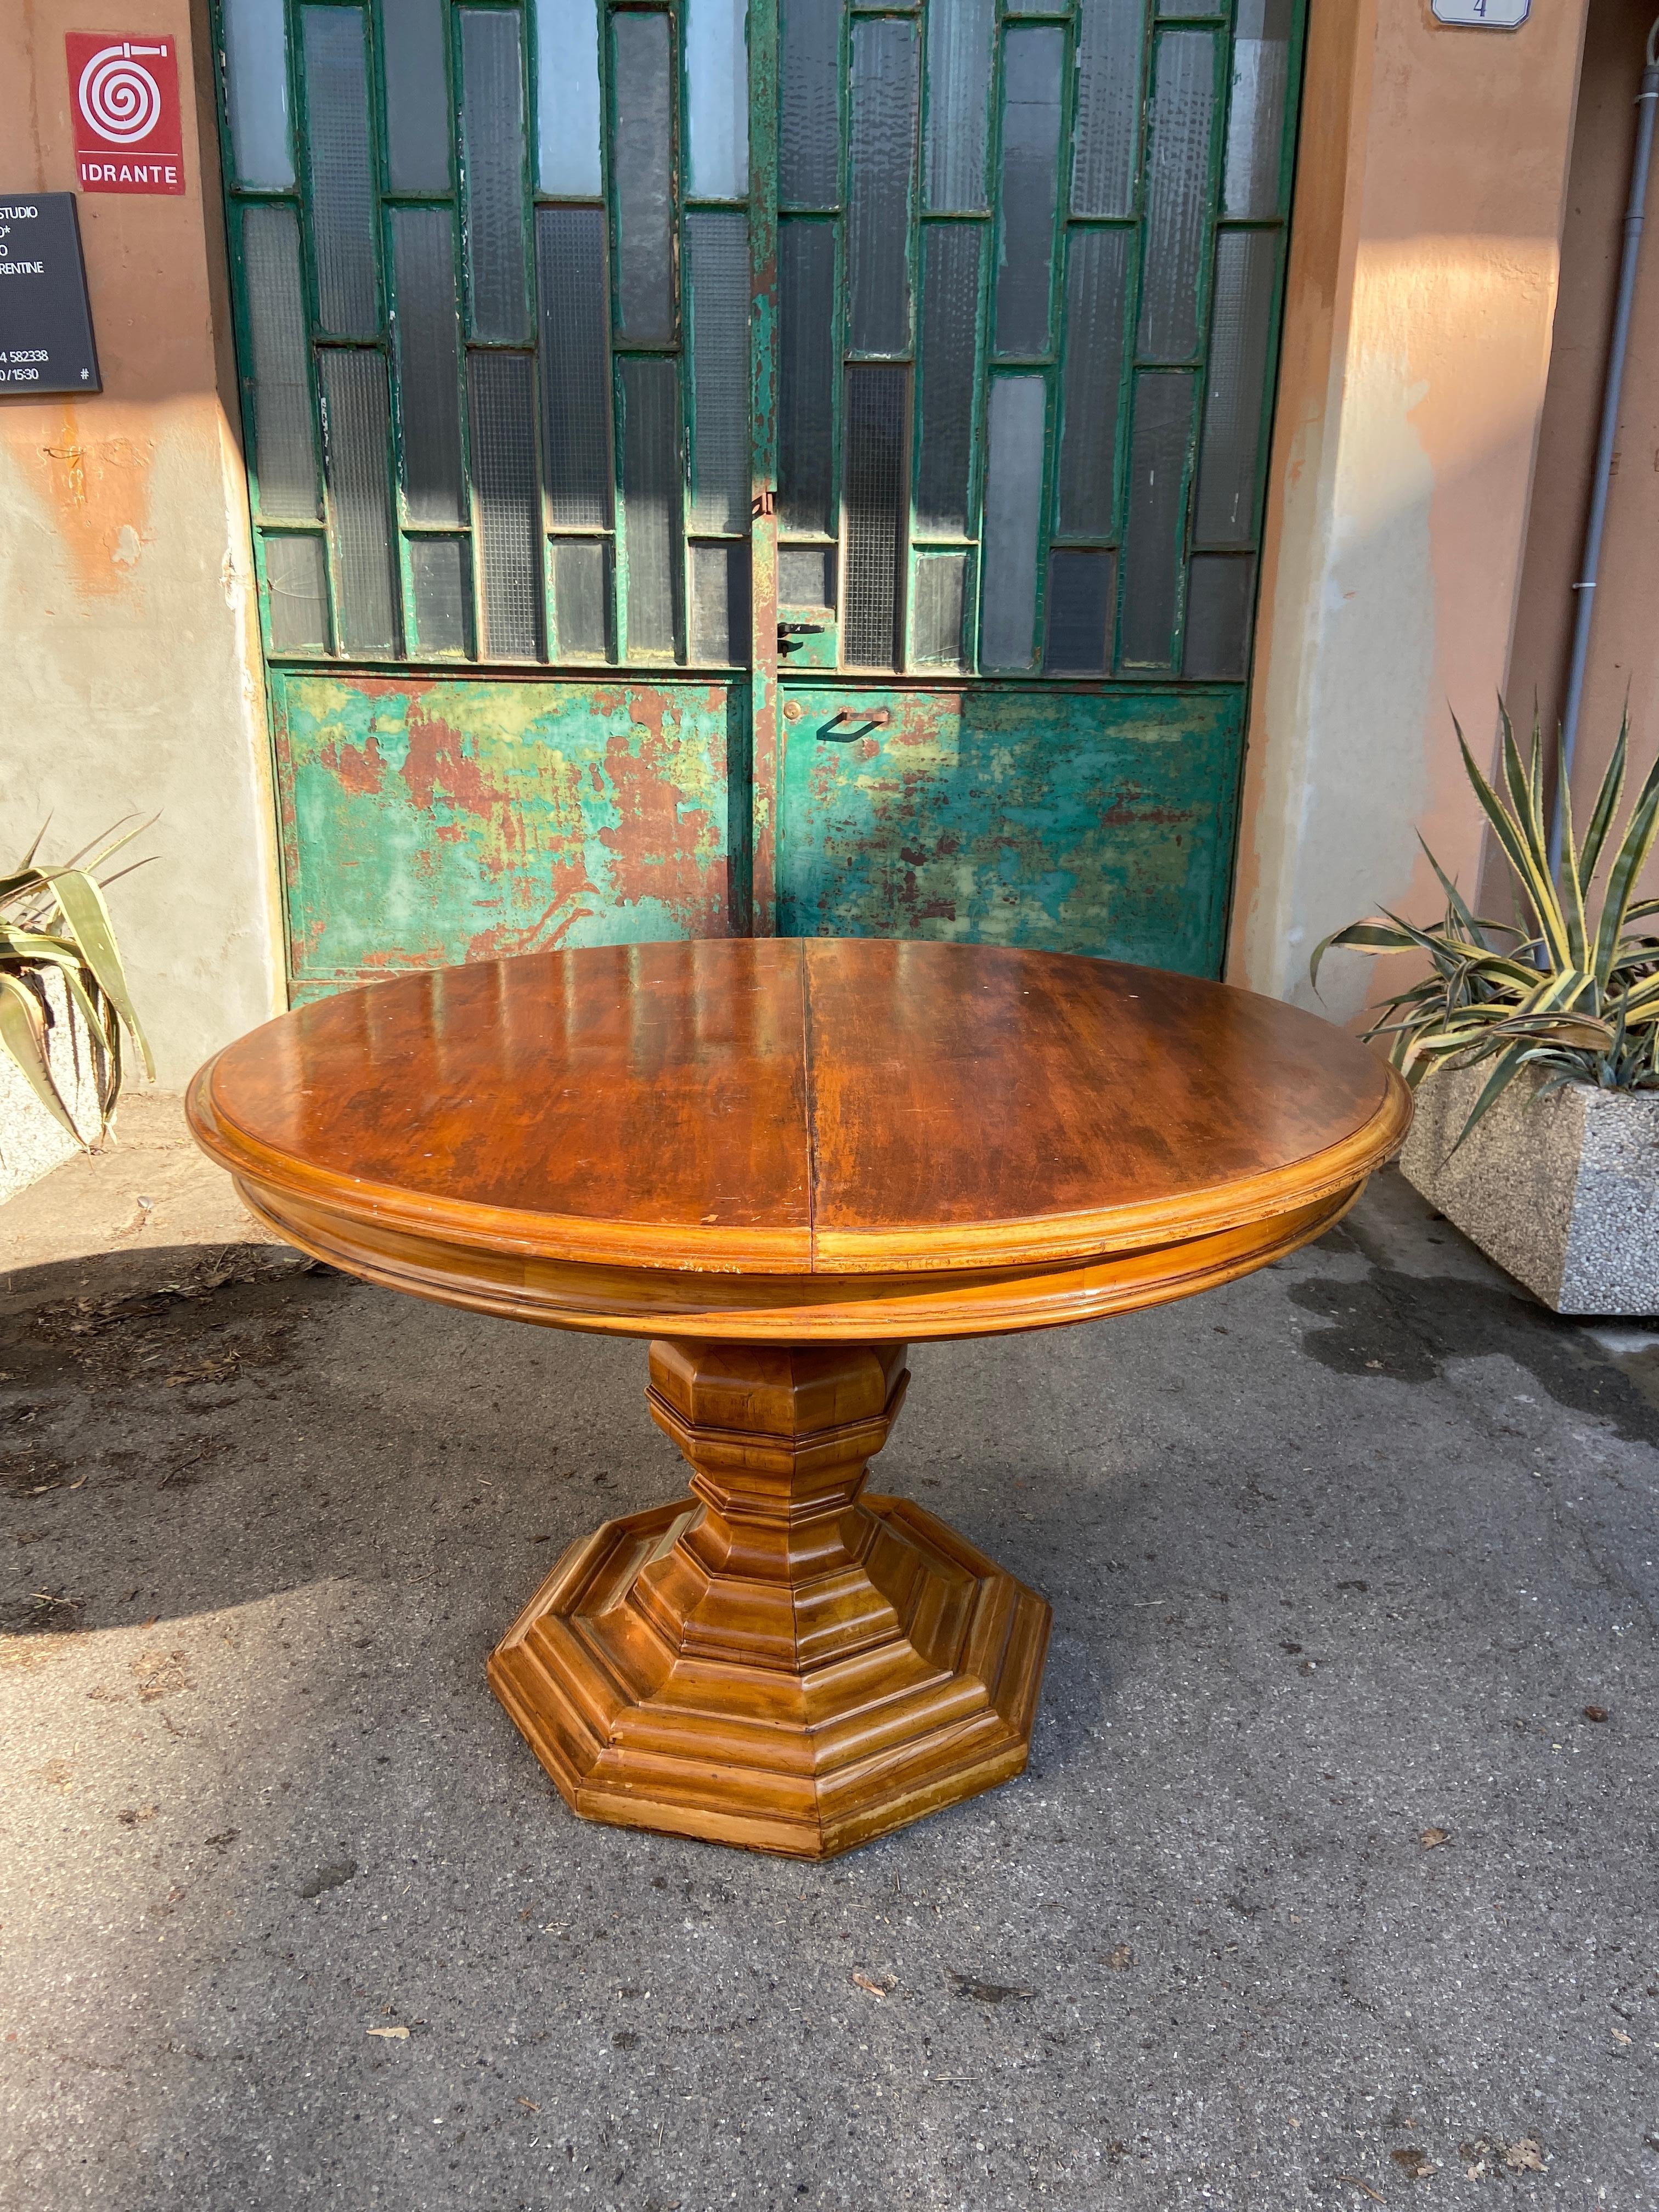 19th Century Italian Octagonal Adjustable Table with Shaped Wooden Leg For Sale 1